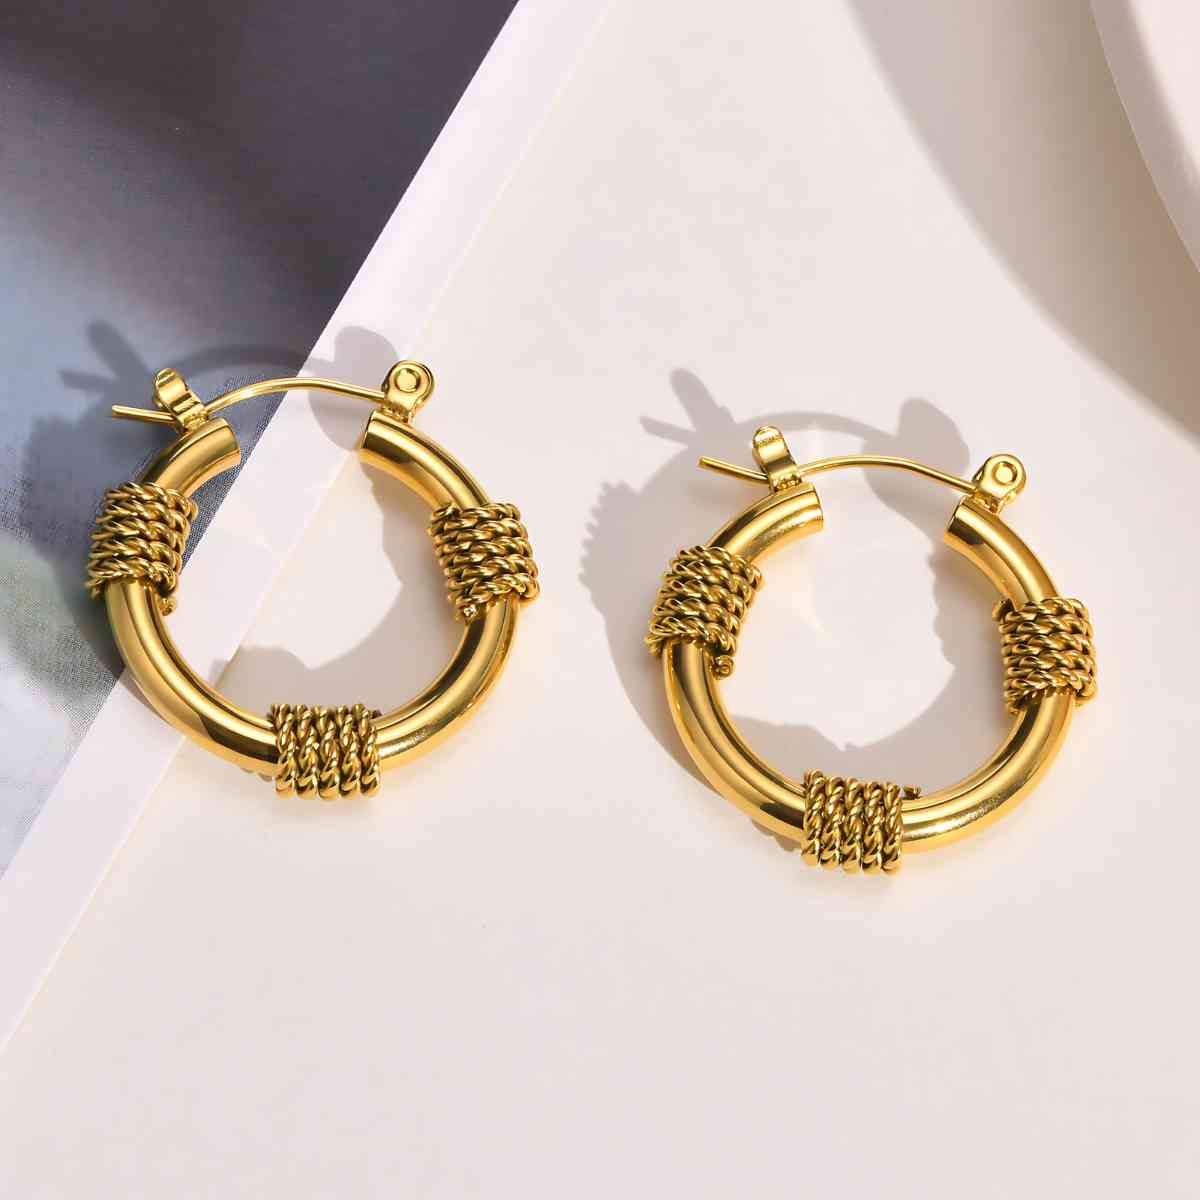 Rope Knot Hoop Earrings Gold Xenos Jewelry